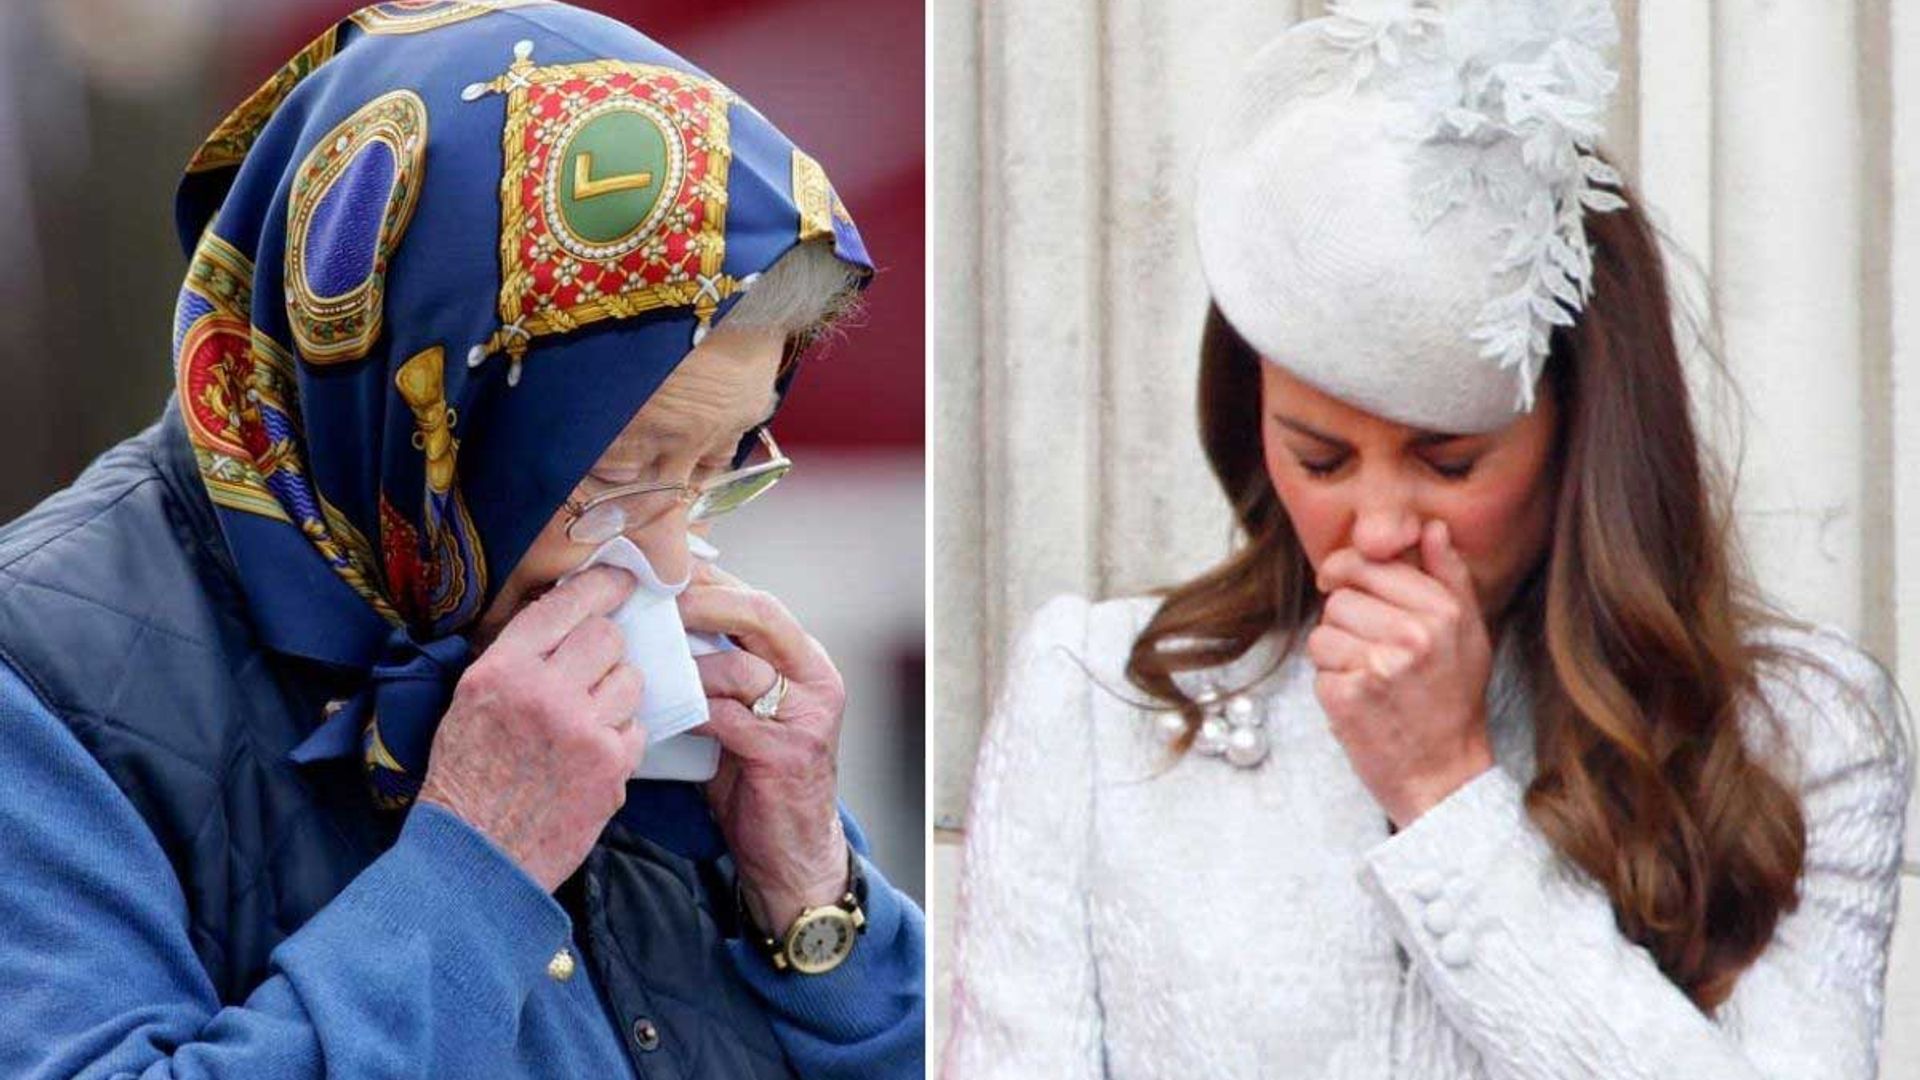 Royal hay fever: Sneezes from the Queen, Kate Middleton and more caught on camera